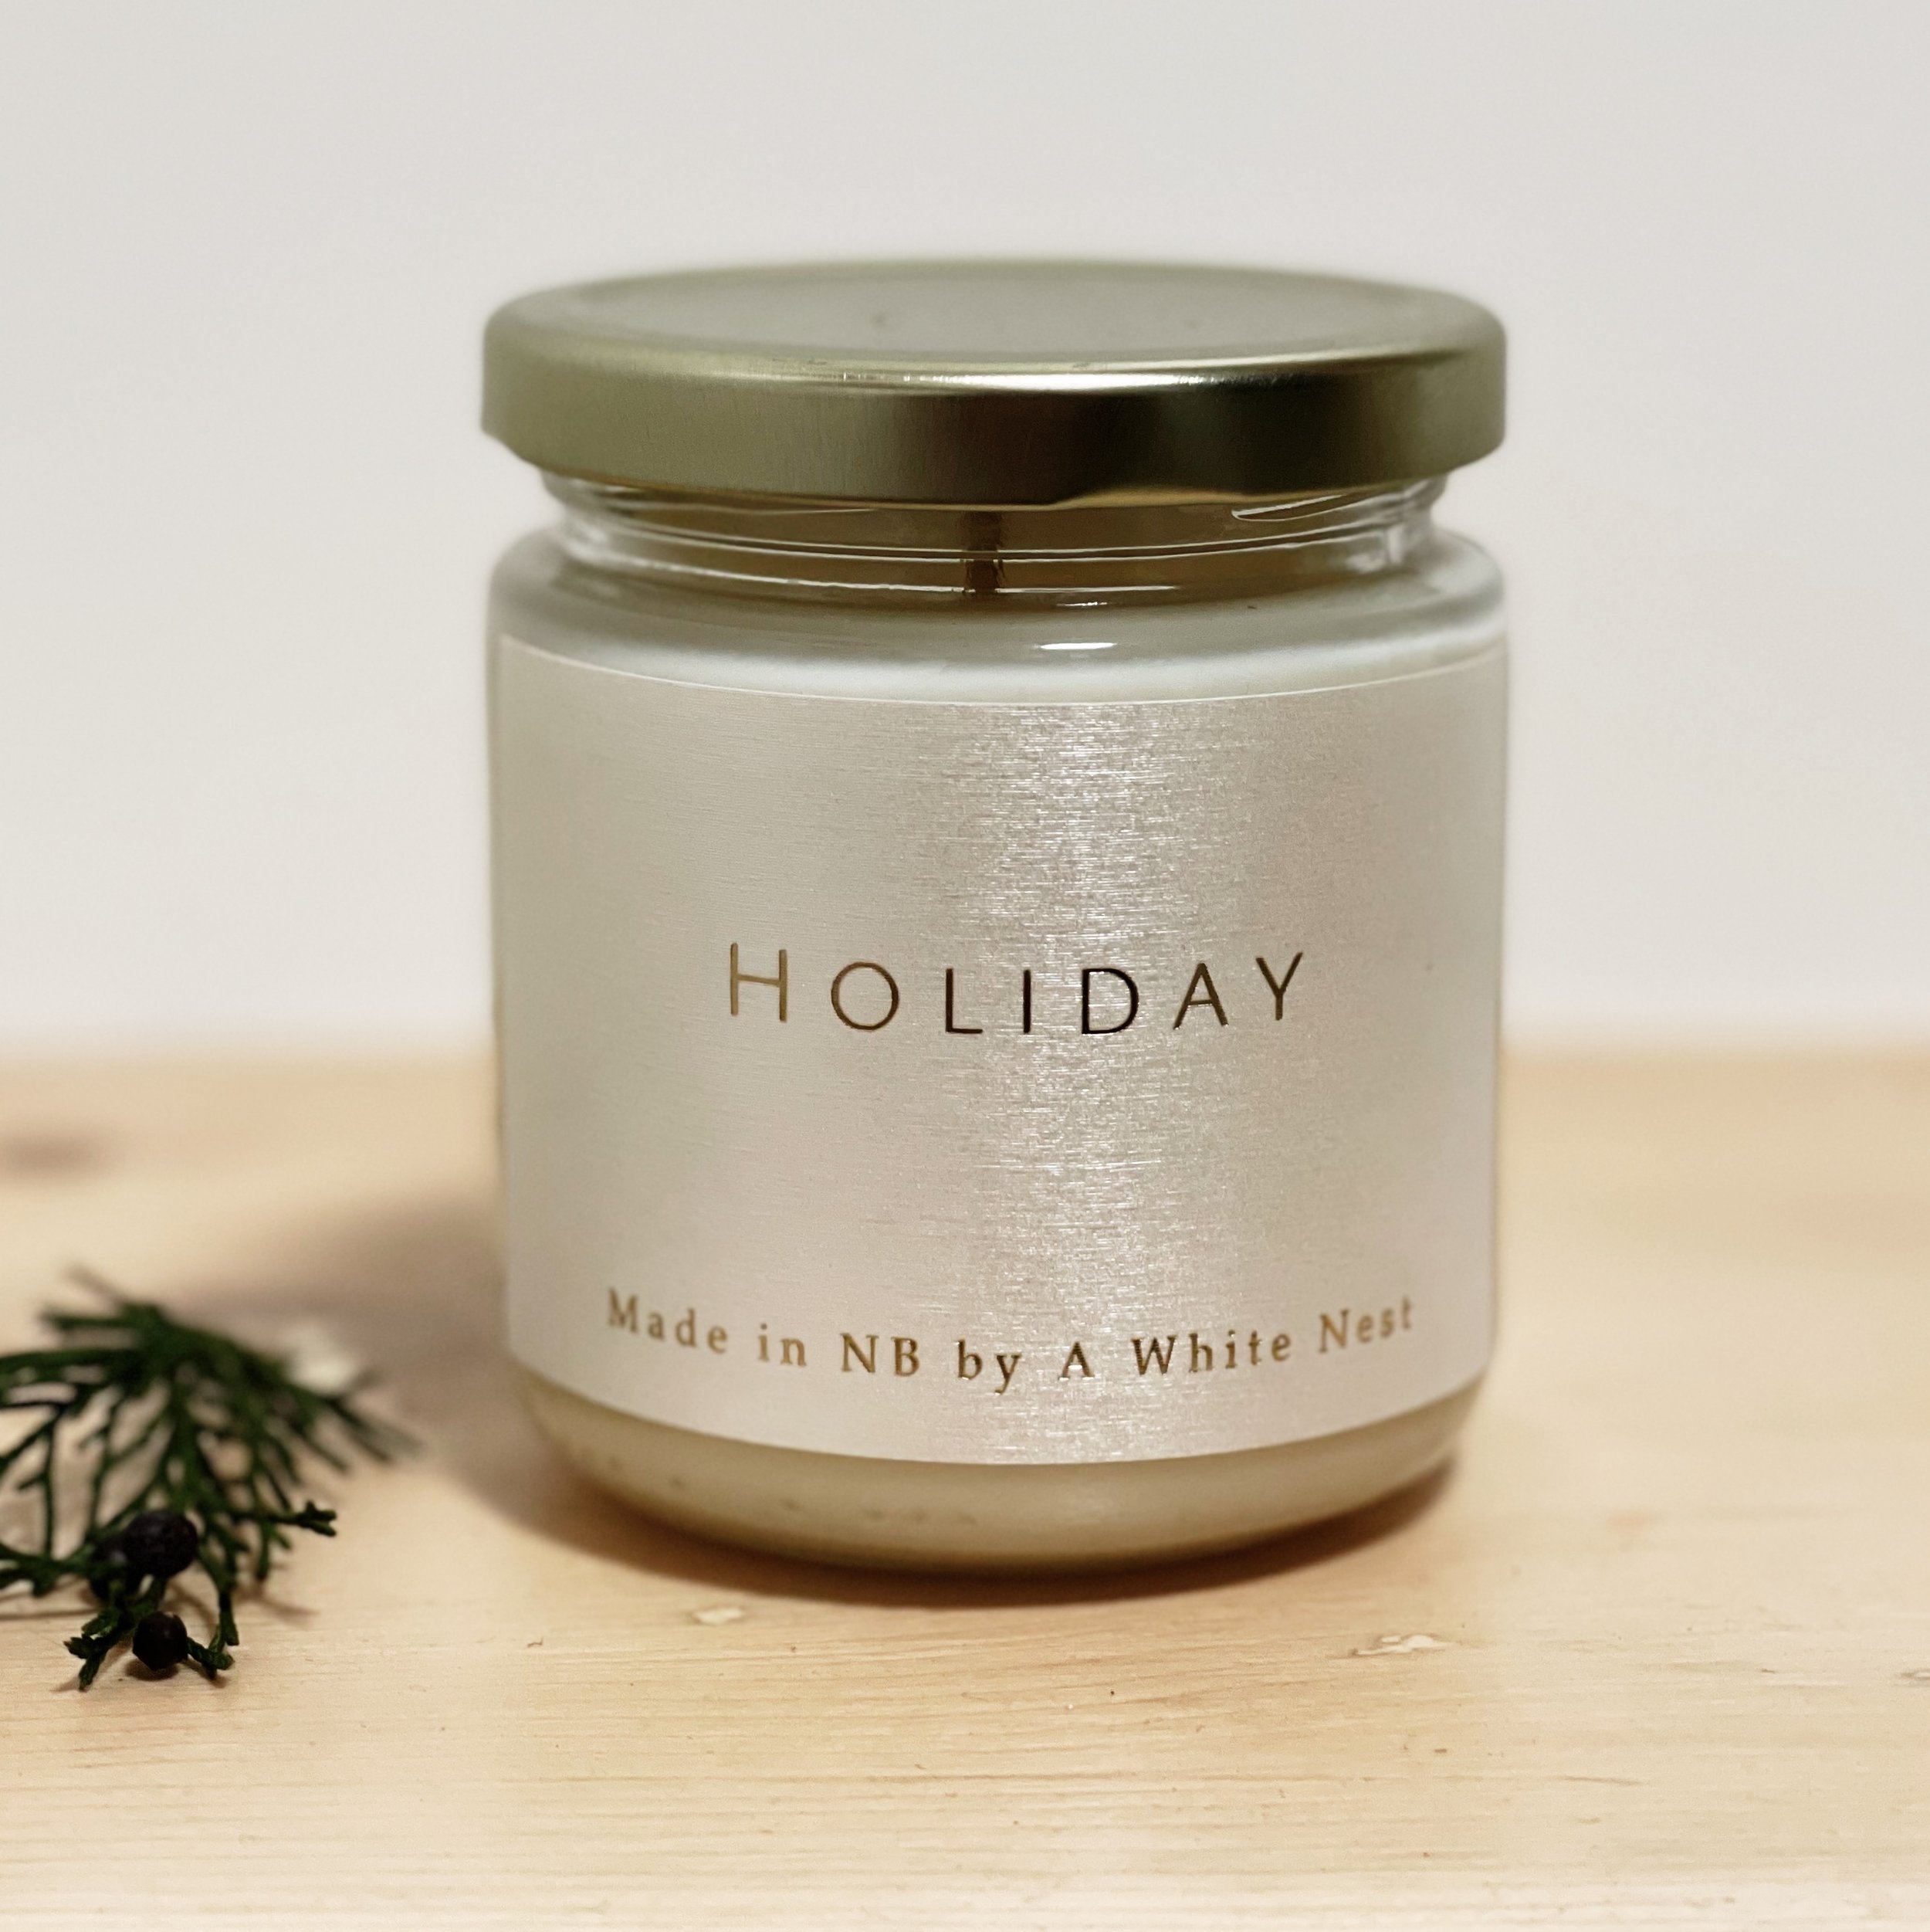 Holiday Candle - $20.00